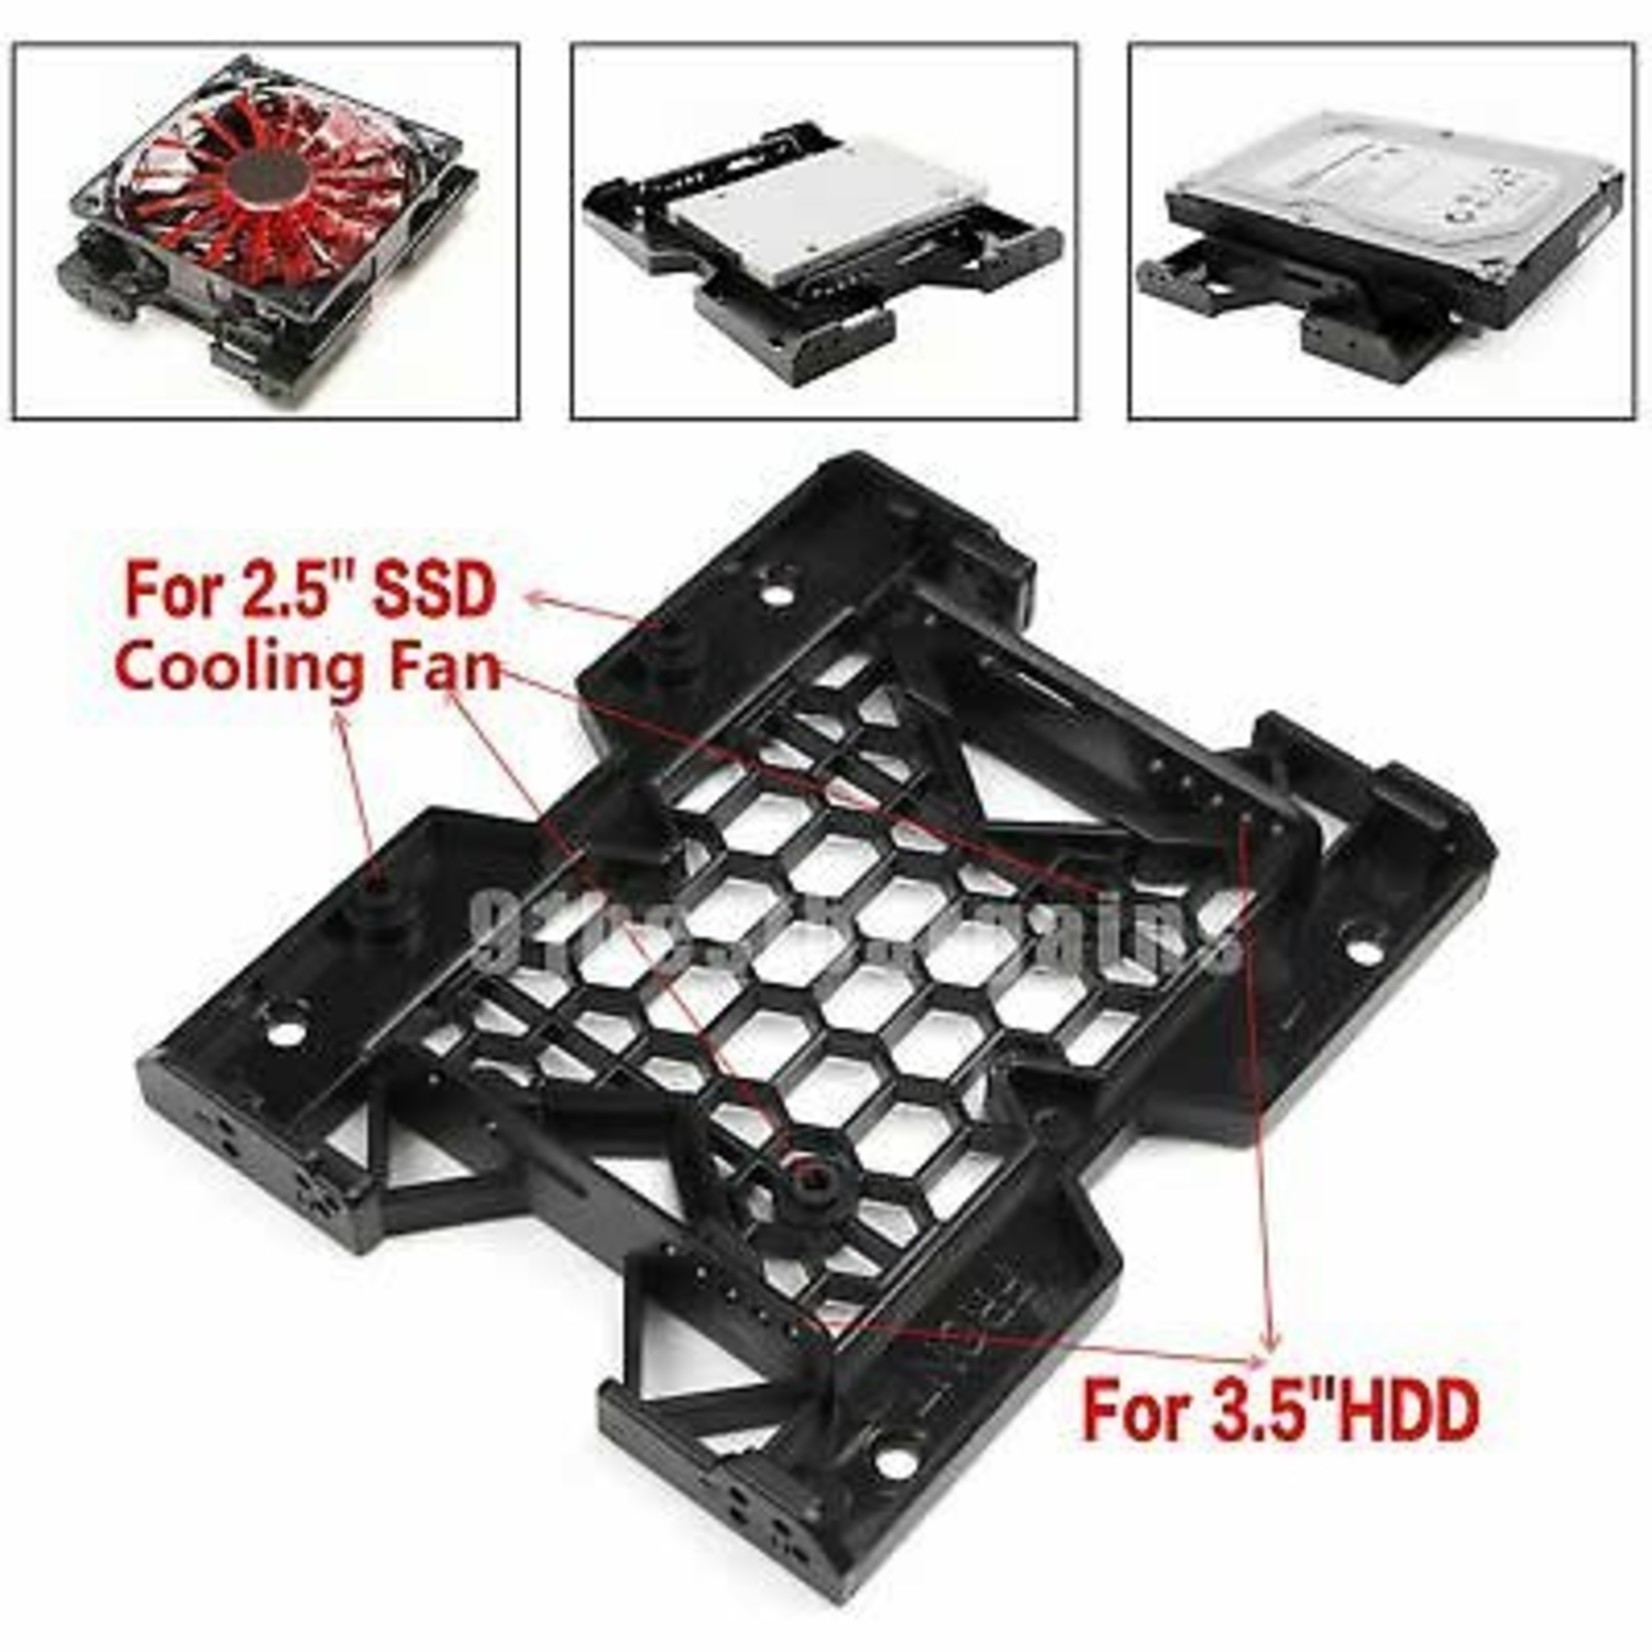 MISC 2.5 / 3.5 to 5.25 Drive Bay Computer Case Adapter HDD Mounting Bracket SSD